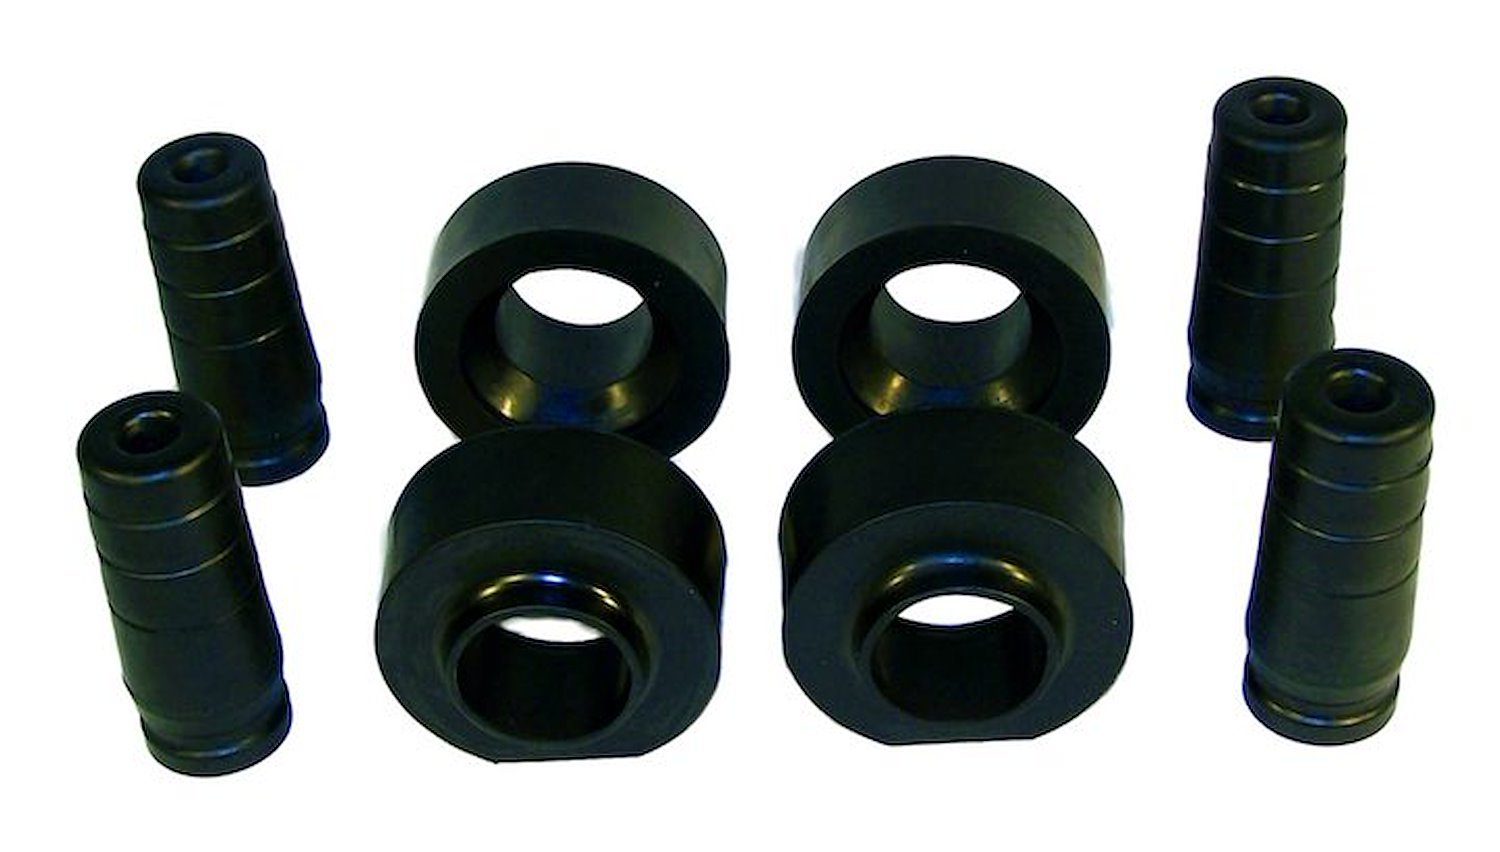 RT21028 Poly Spacer Lift Kit (1.75 inches) for 1997-2006 Jeep TJ Wrangler; Allows for the use of 31" x 10.50" Tires